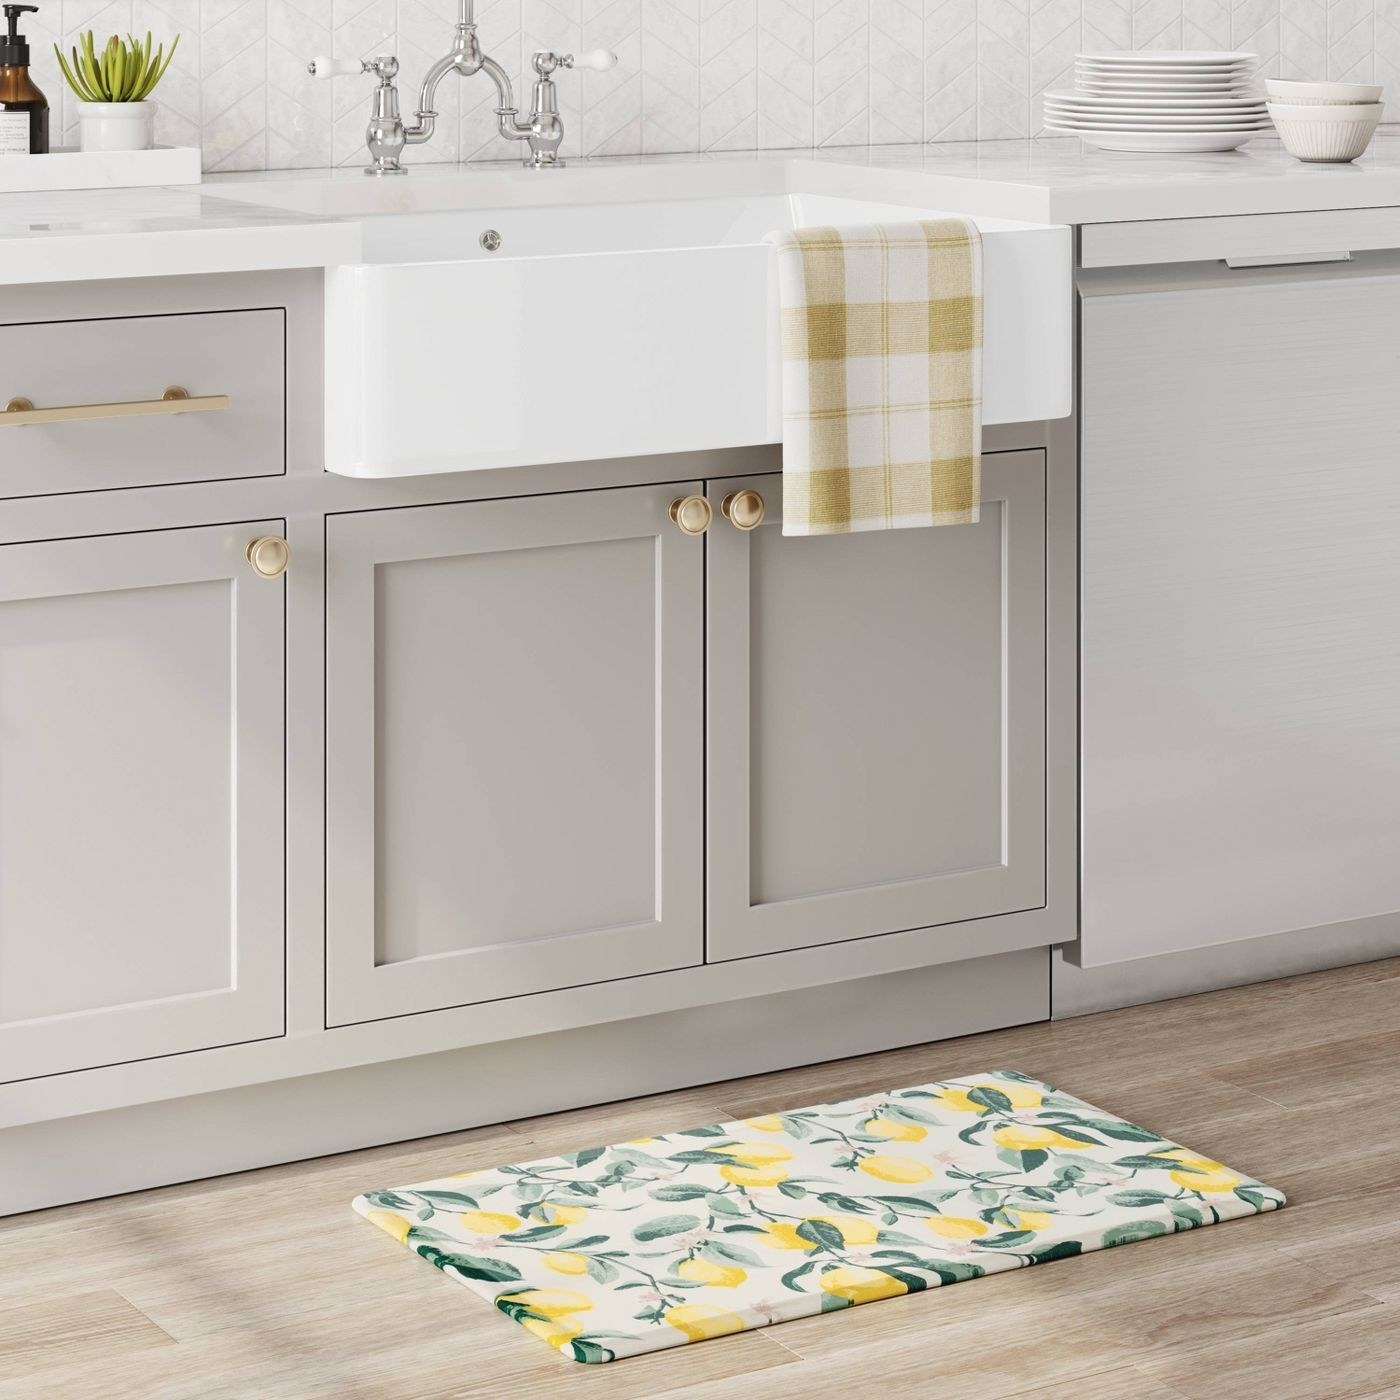 the lemon print mat in front of a kitchen sink